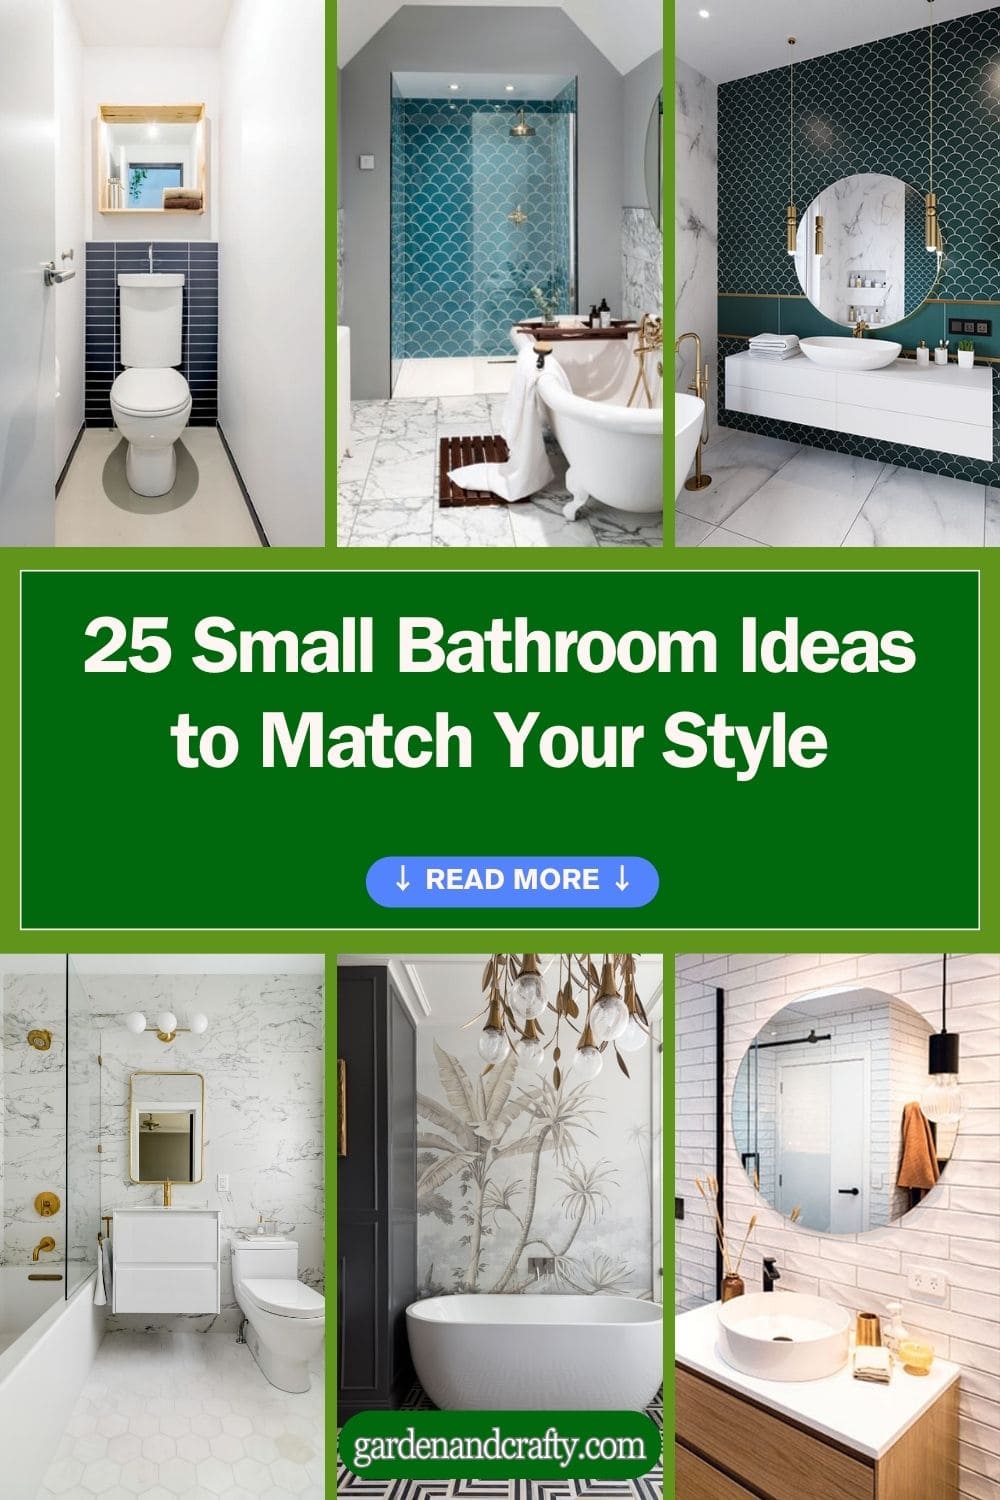 25 Small Bathroom Ideas to Match Your Style